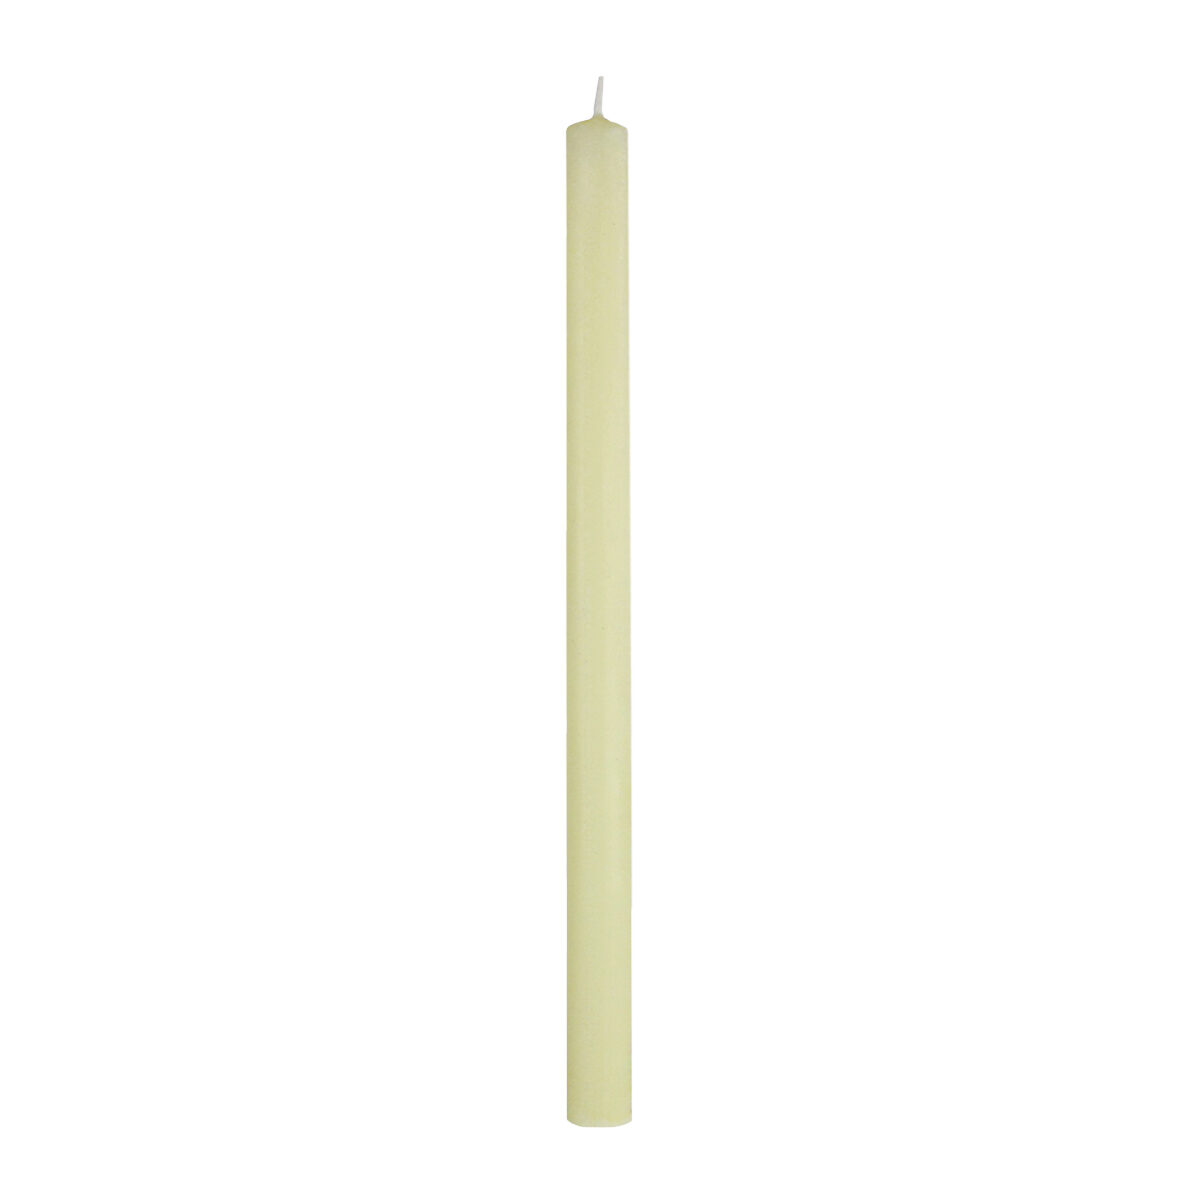 100% BEESWAX 7/8" x 12" PLAIN END CANDLE STICK